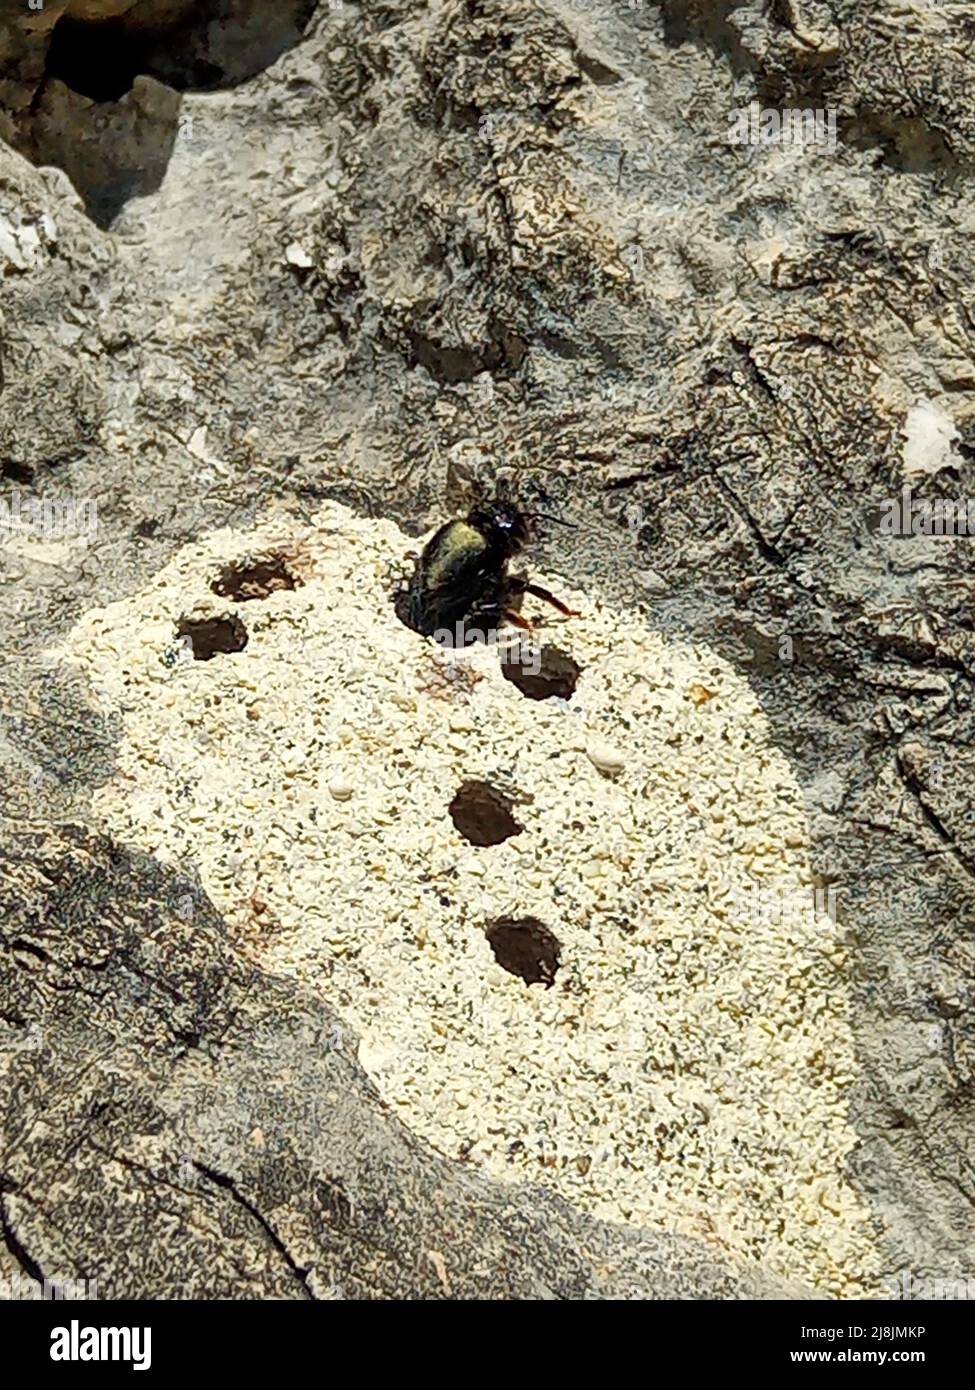 Large Carpenter Bees (Genus Xylocopa) making a nest in the ground. Stock Photo